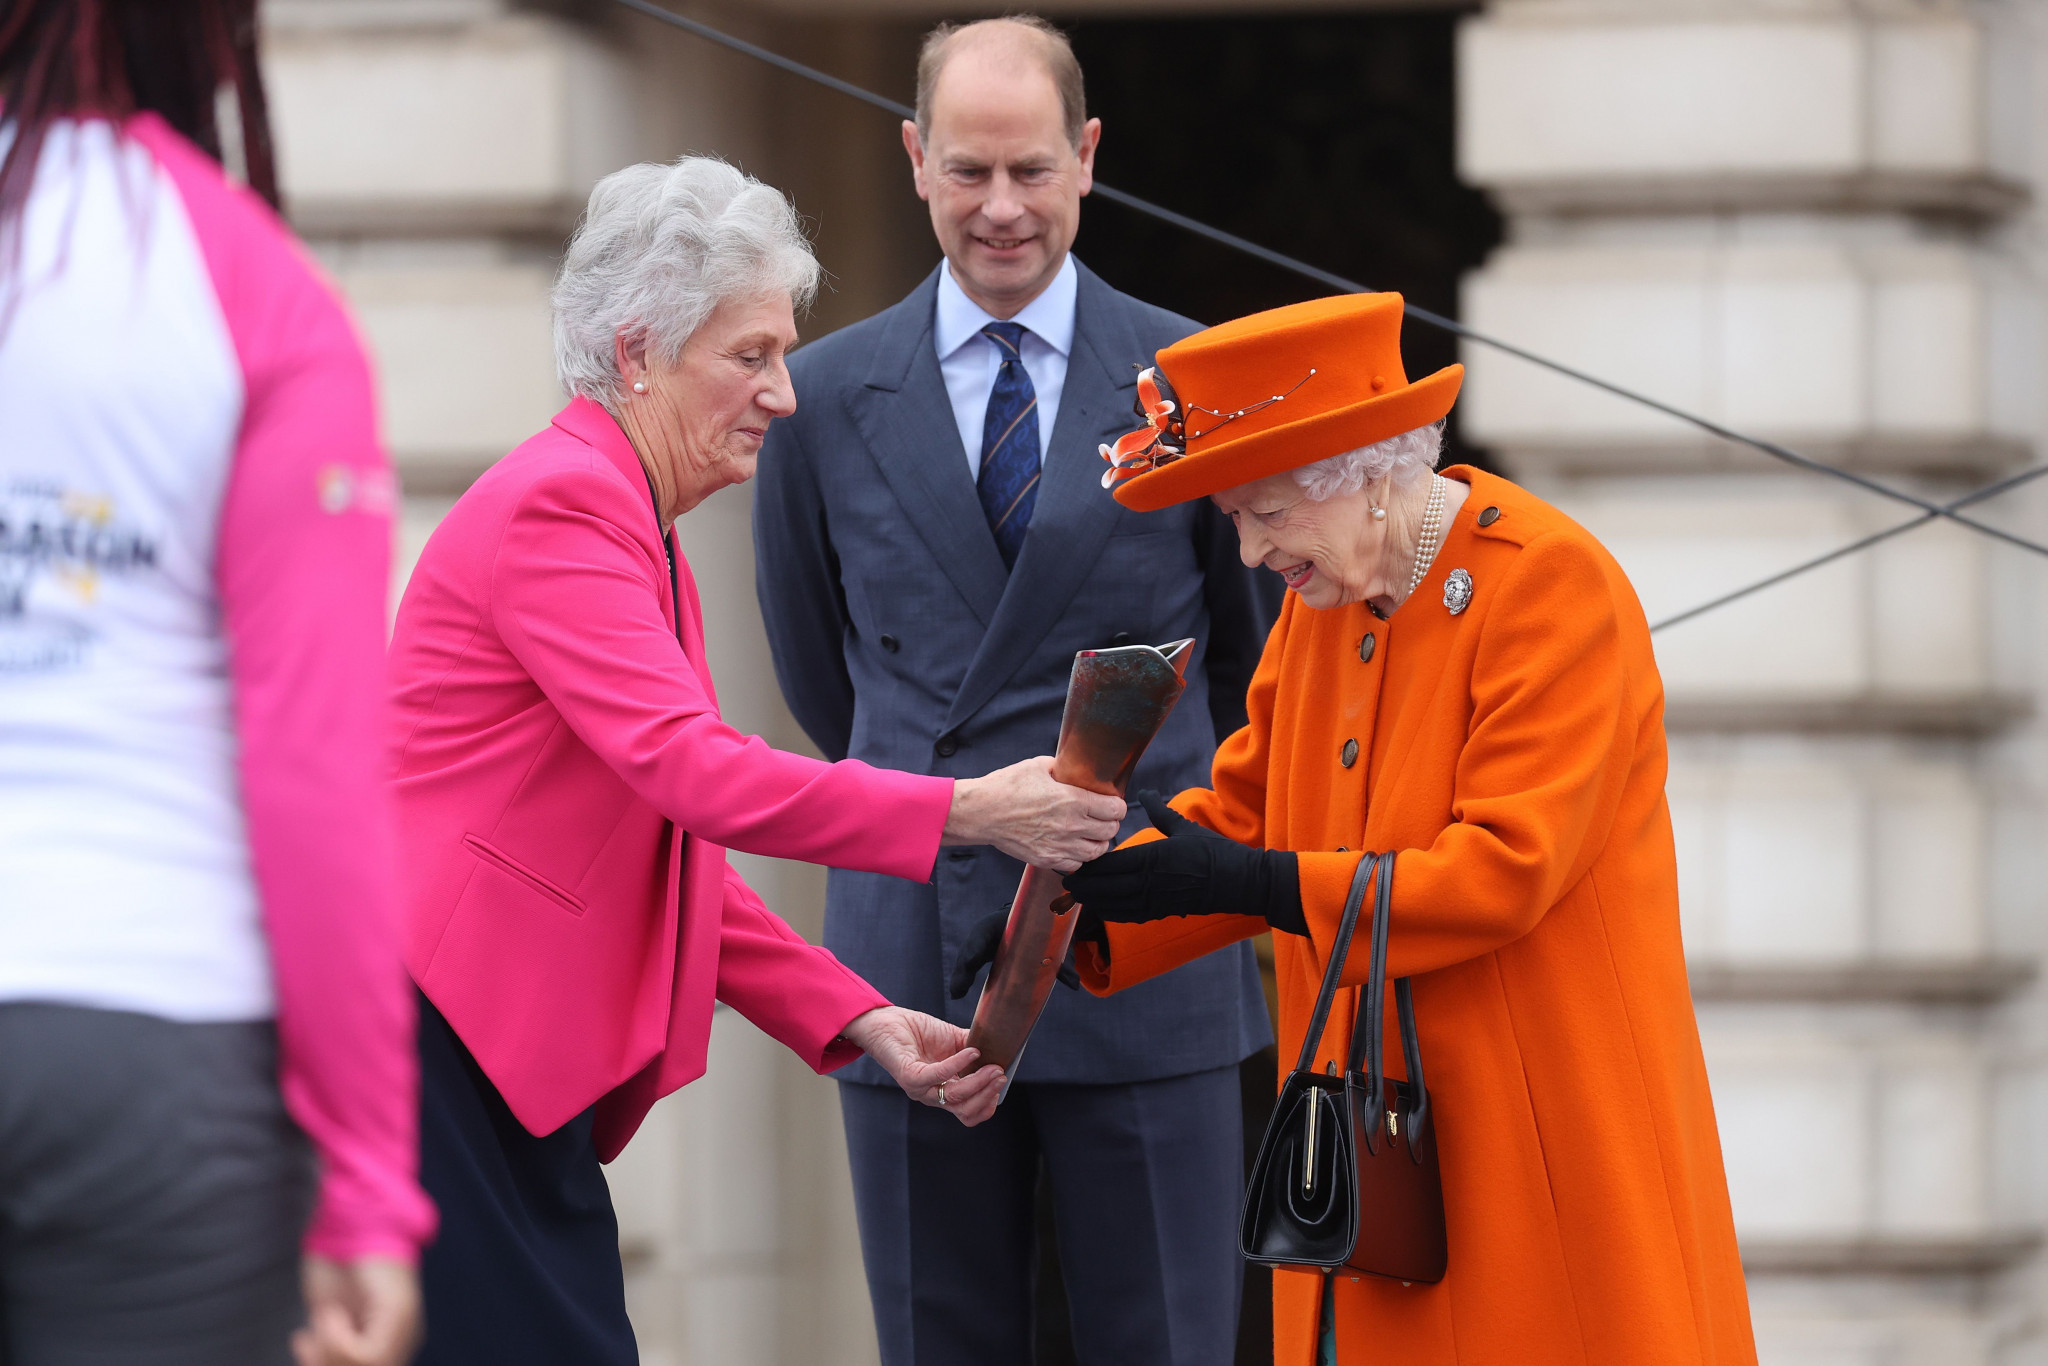 The Queen's Baton Relay, part of the build-up to the Birmingham 2022 Commonwealth Games, got underway at Buckingham Palace earlier this month ©Getty Images 